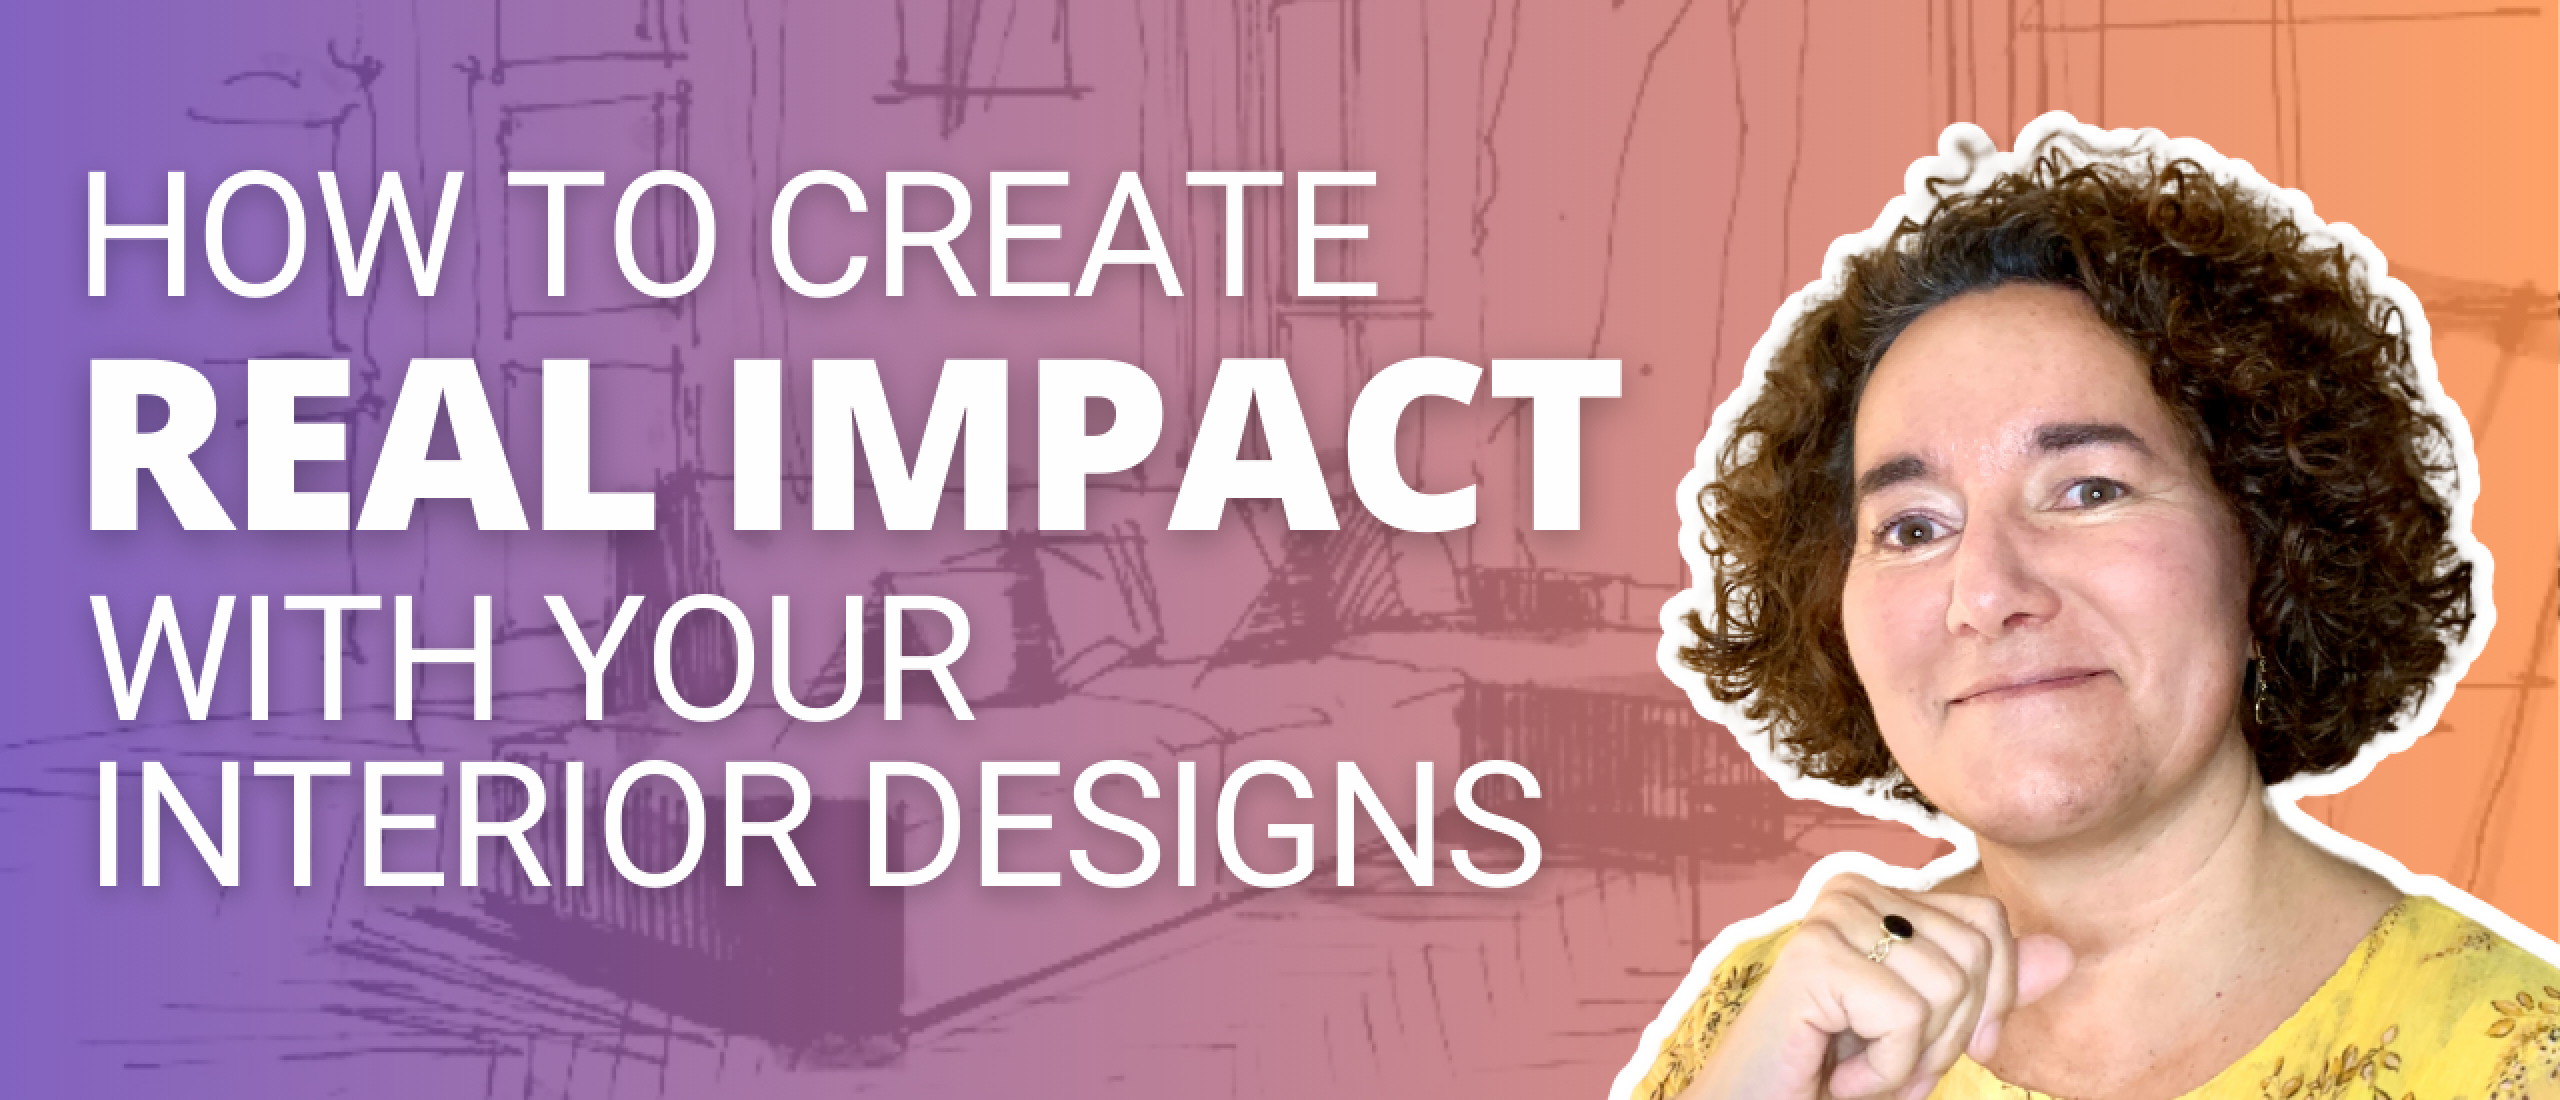 How to create real impact with your interior design - with Sisi Salamanca